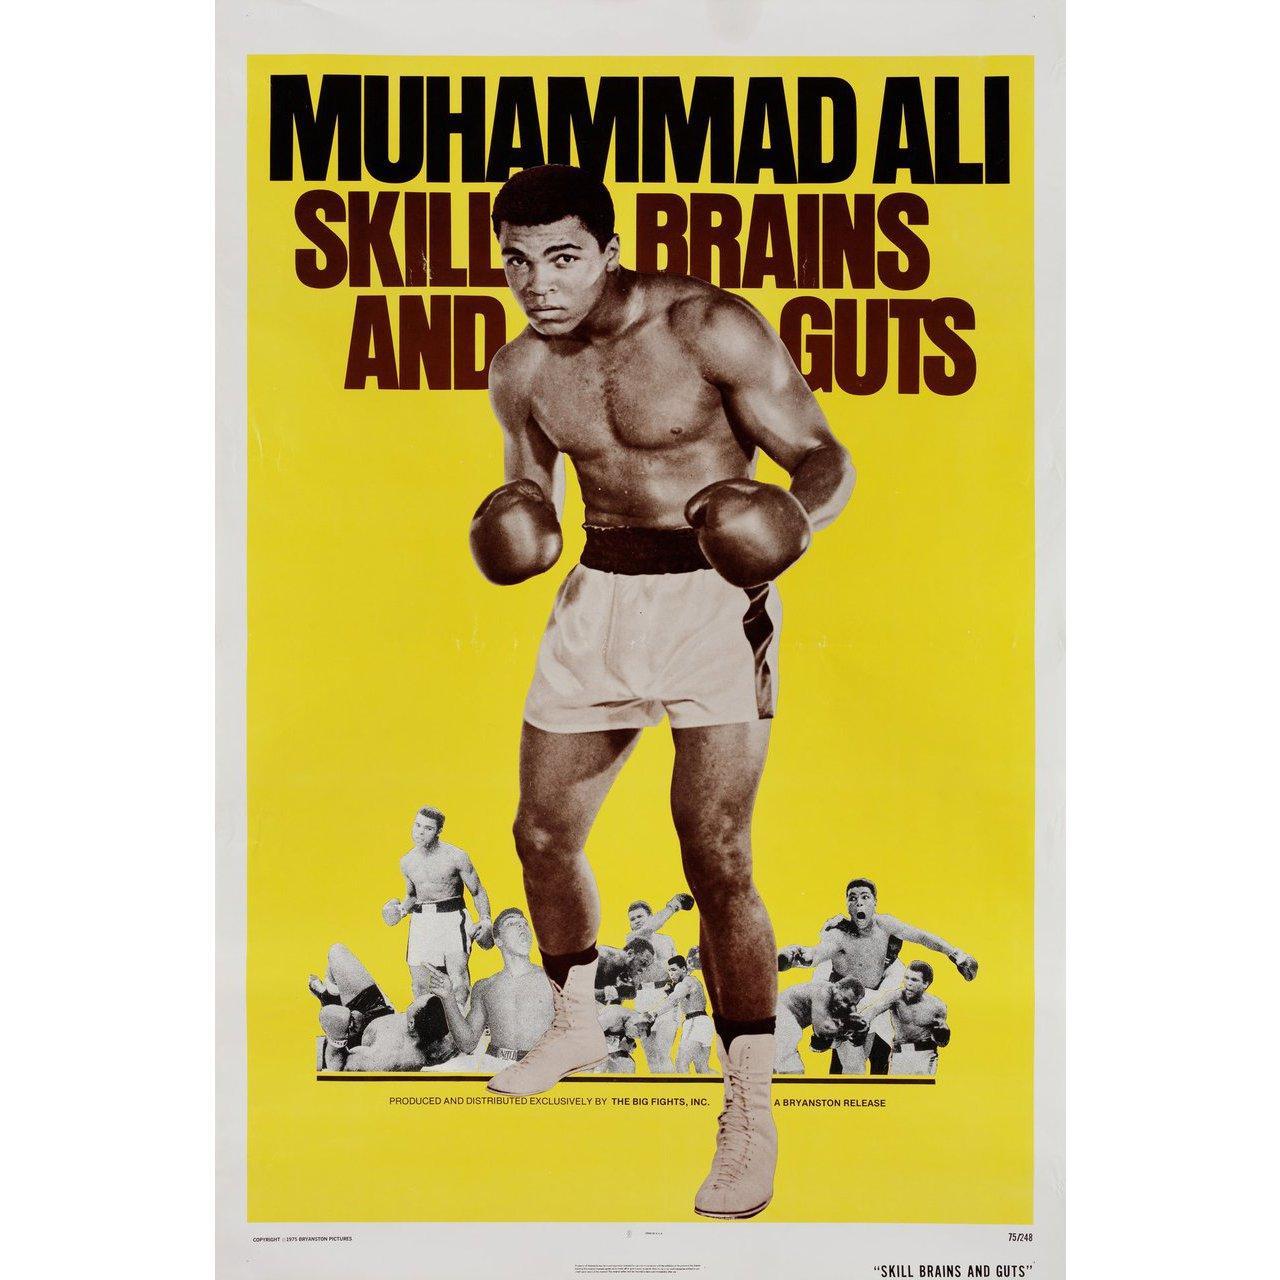 American Muhammad Ali: Skill Brains and Guts 1975 U.S. One Sheet Film Poster For Sale